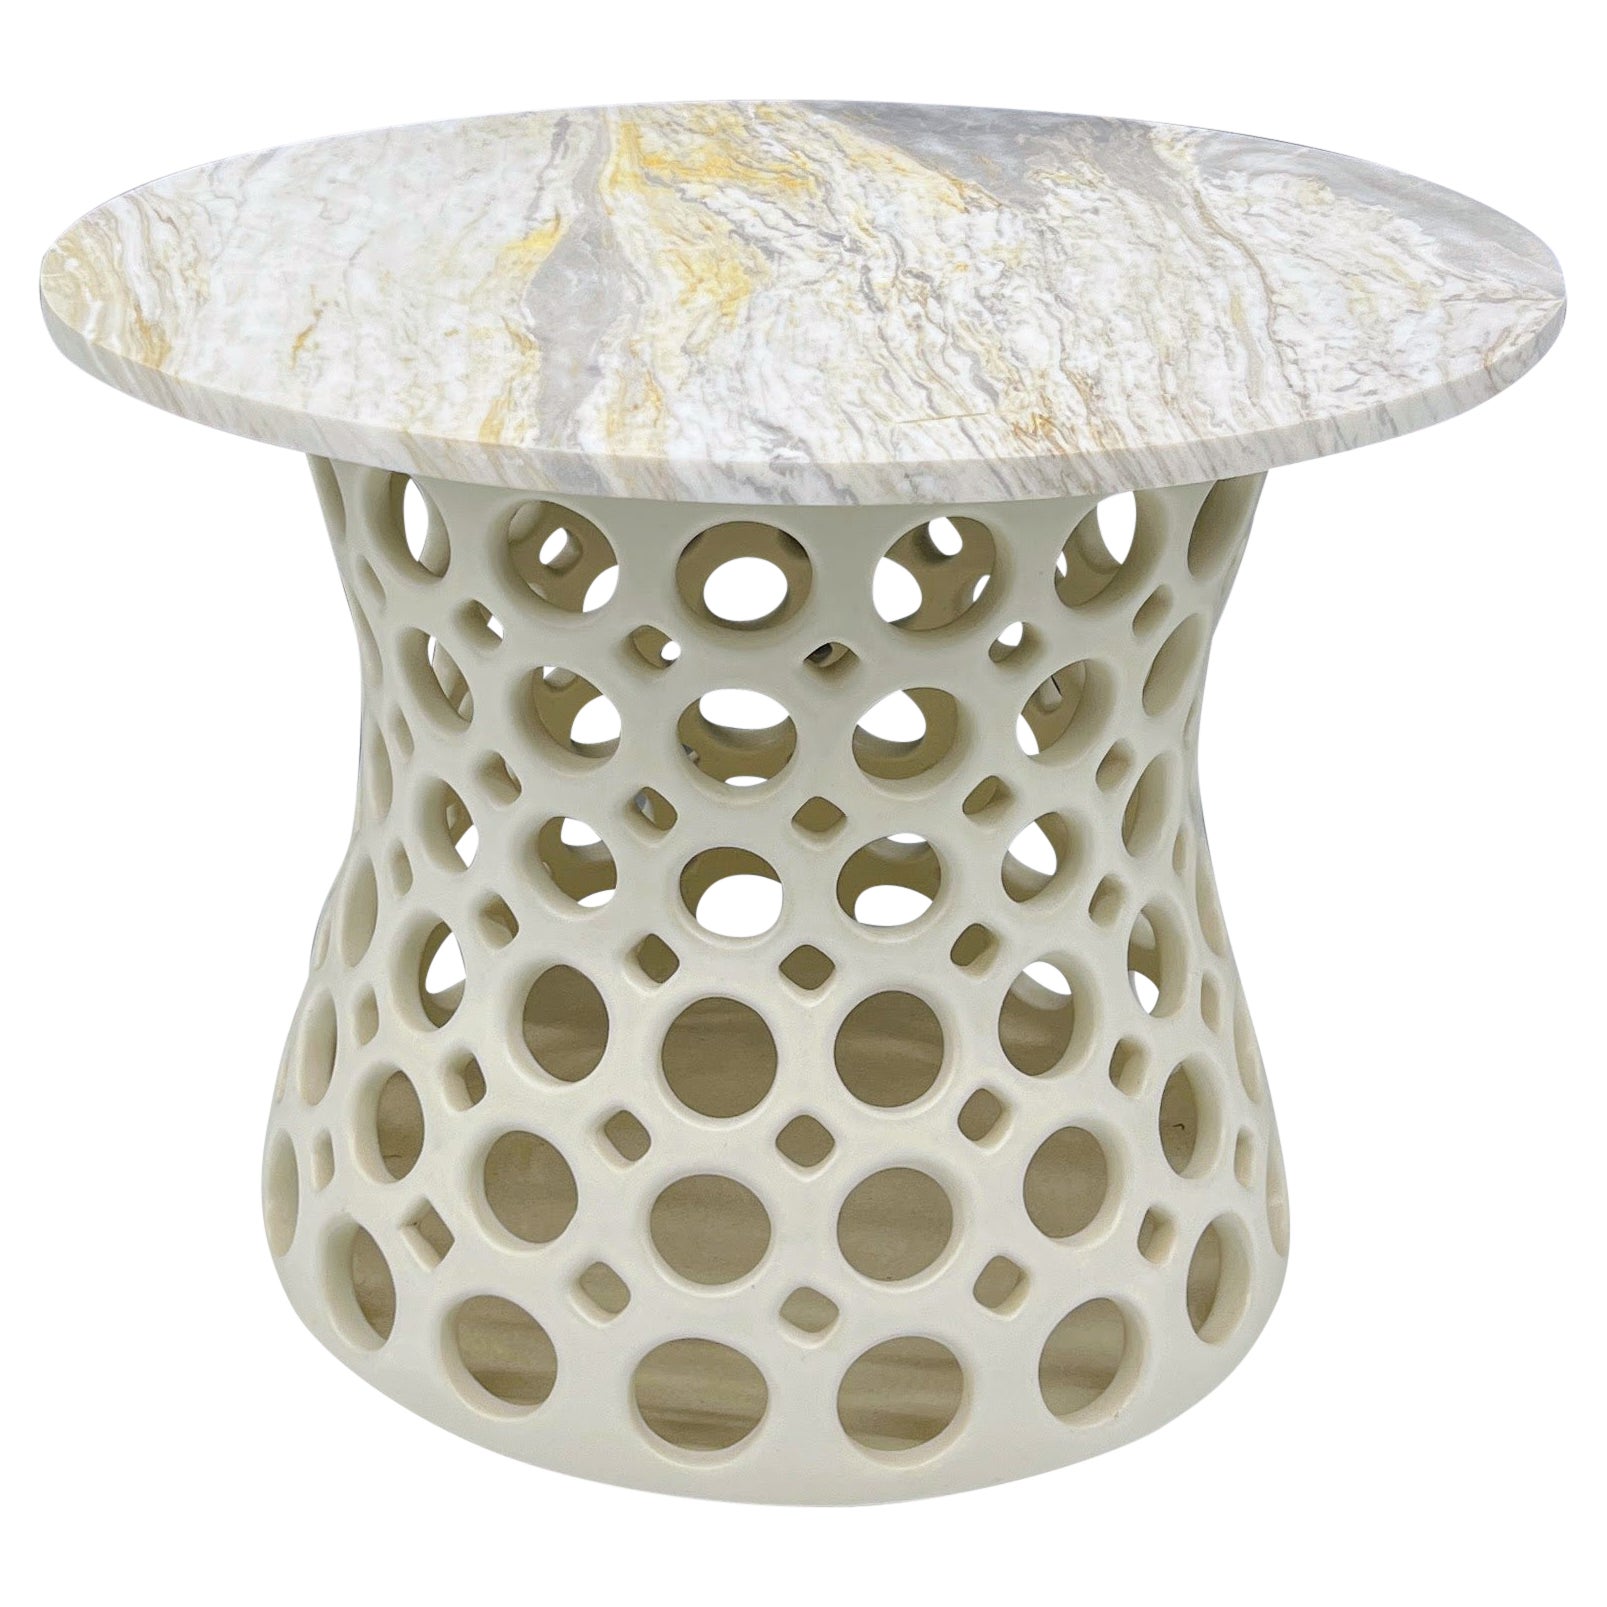 Pierced White Ceramic Side Table with Grey, White Stone Top